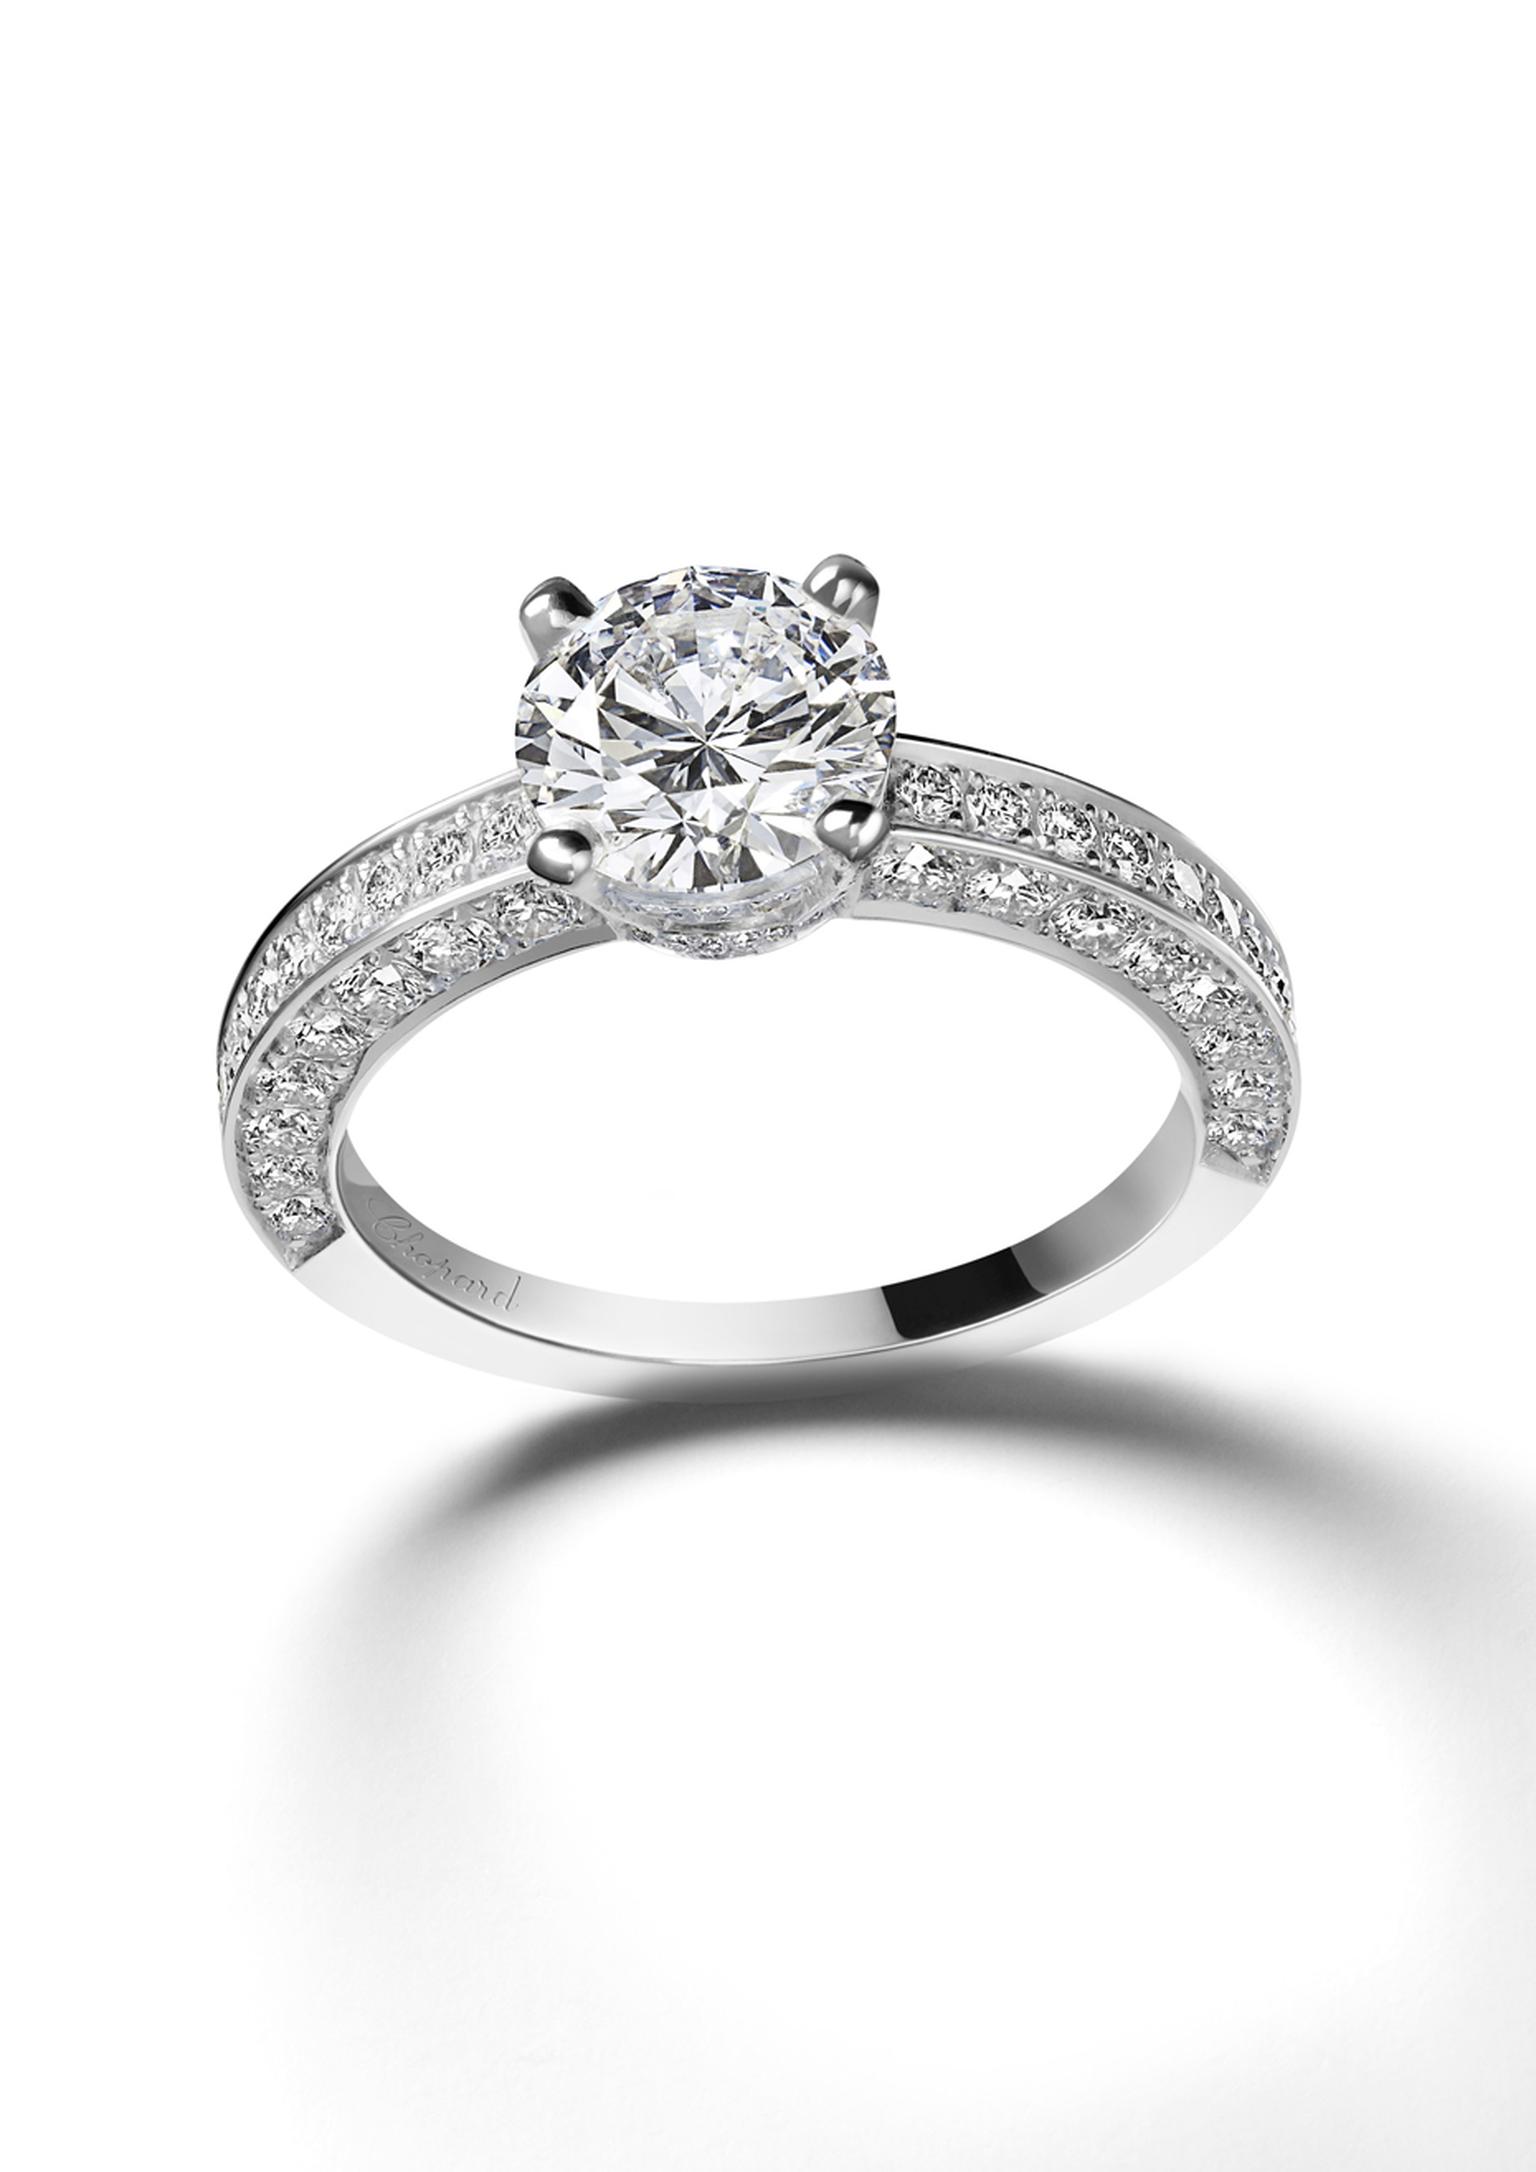 Chopard Passion for Happiness collection white gold solitaire diamond ring featuring an additional swath of diamonds along the tops and sides of the band.